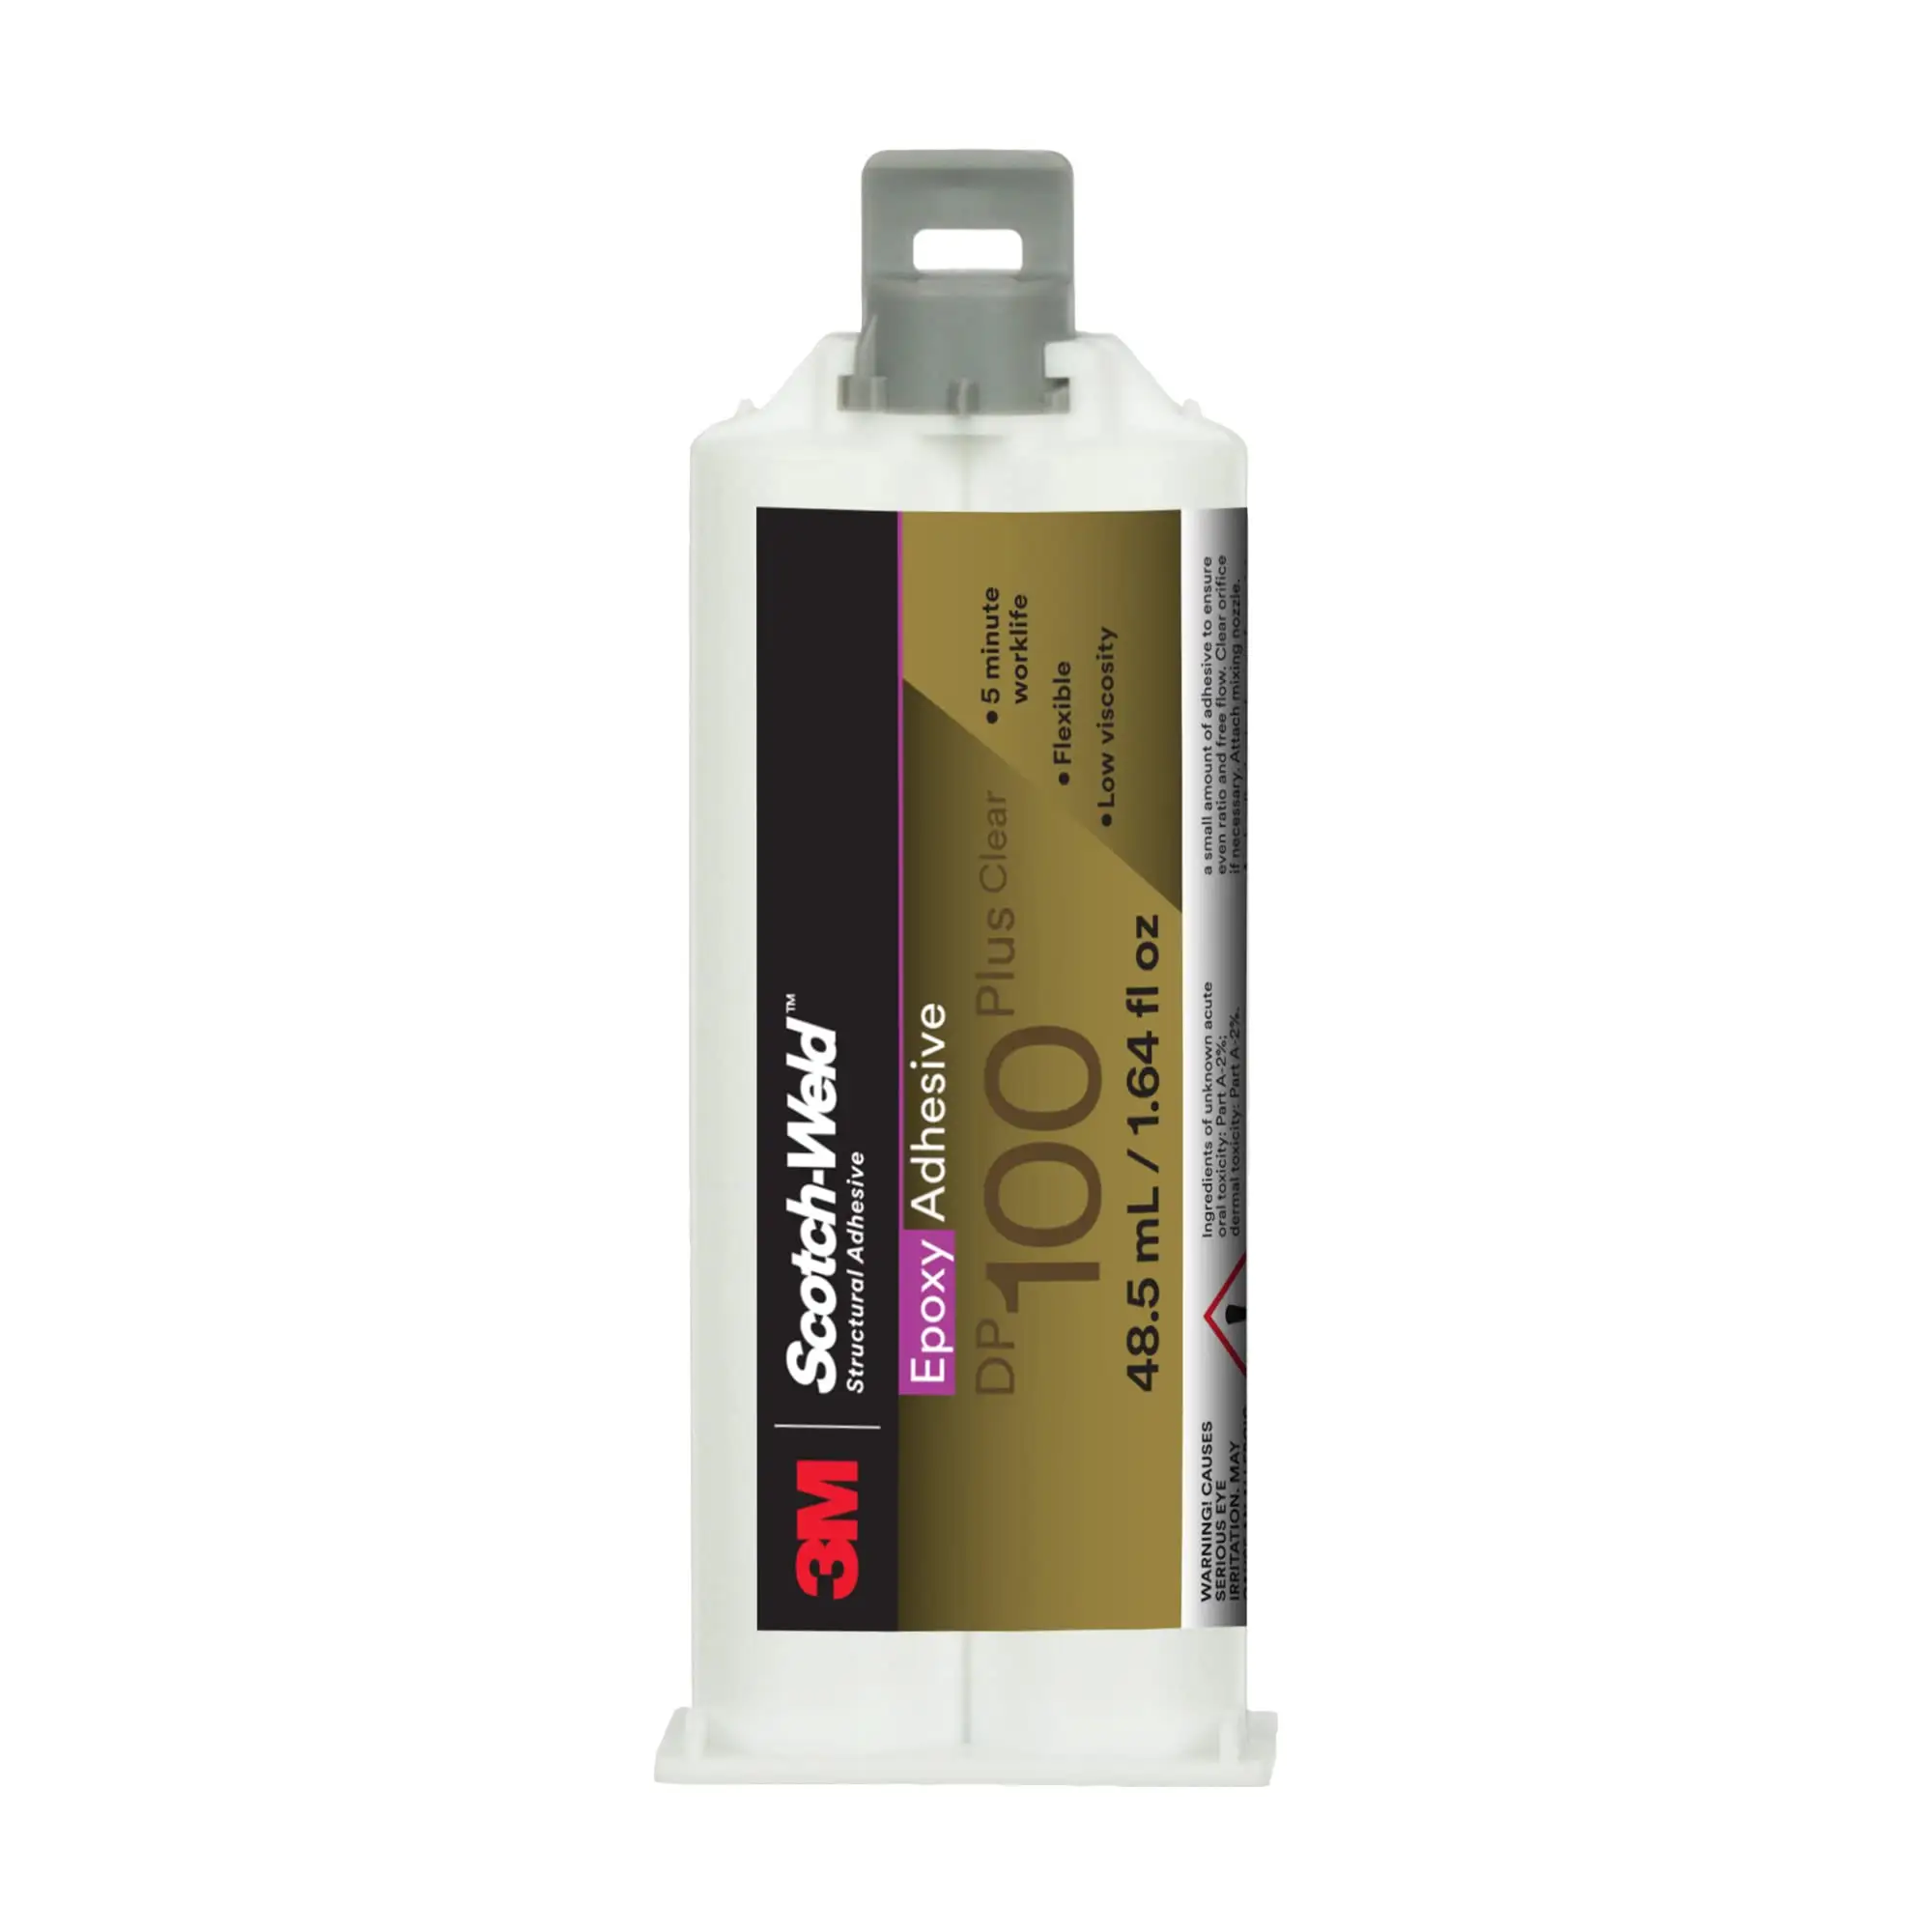 Wholesale Hot Product 3M Scotch-Weld epoxy resin Adhesive DP100 Plus Fast processing and curing